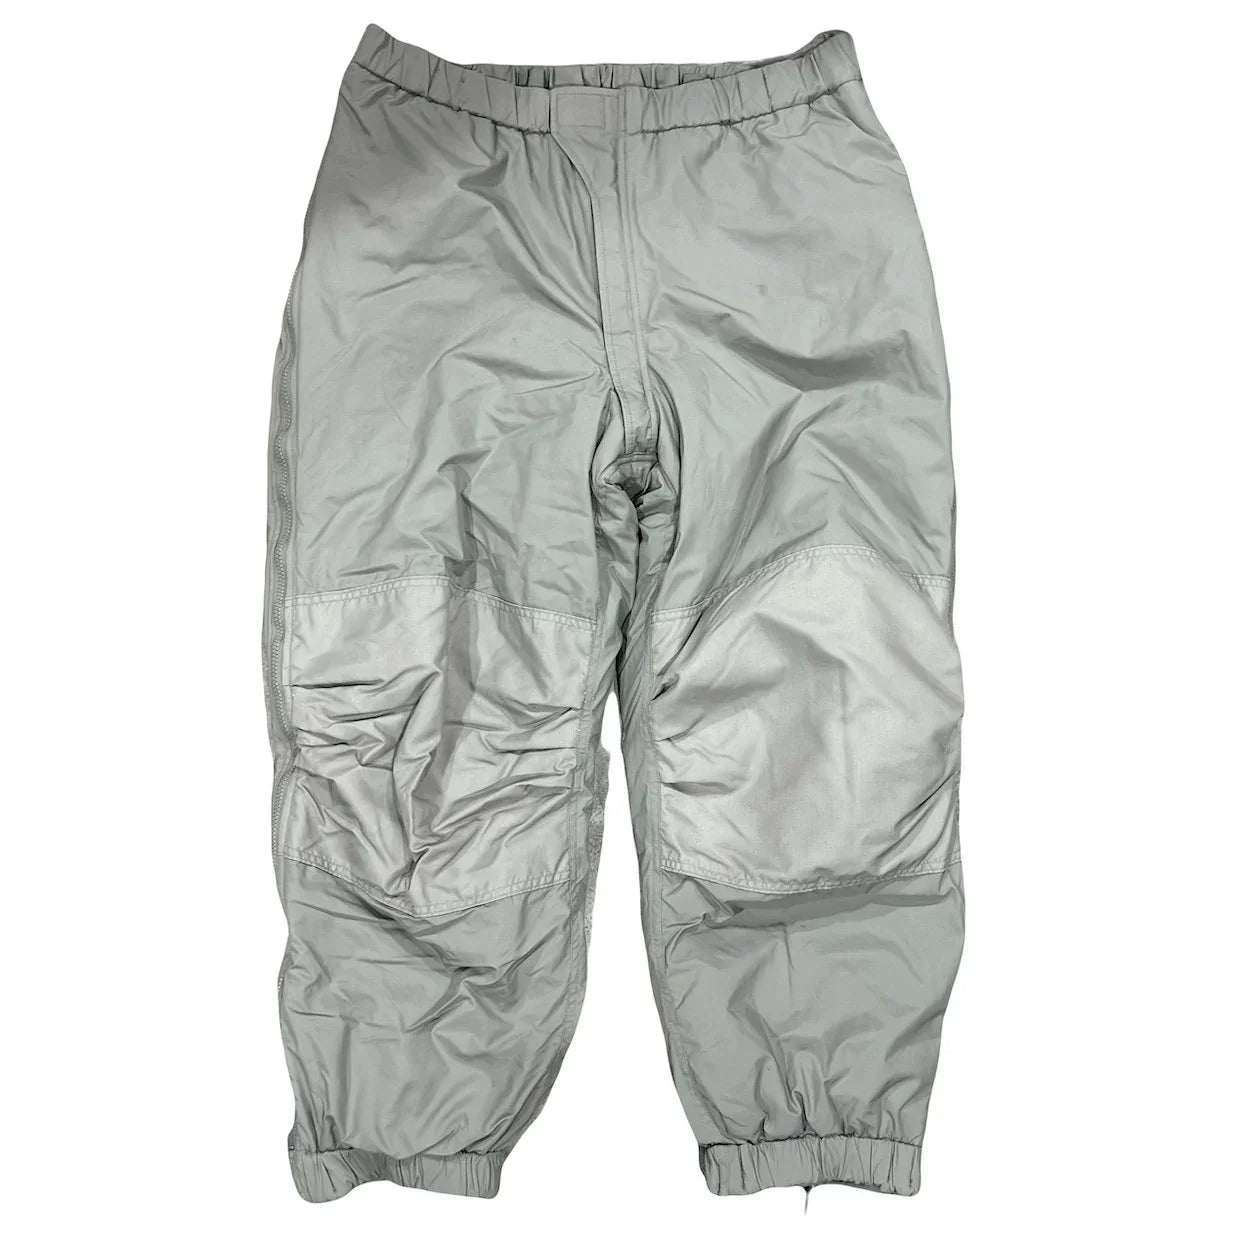 US Army Pants Generation III Extreme Cold Weather Level 7 PrimaLoft